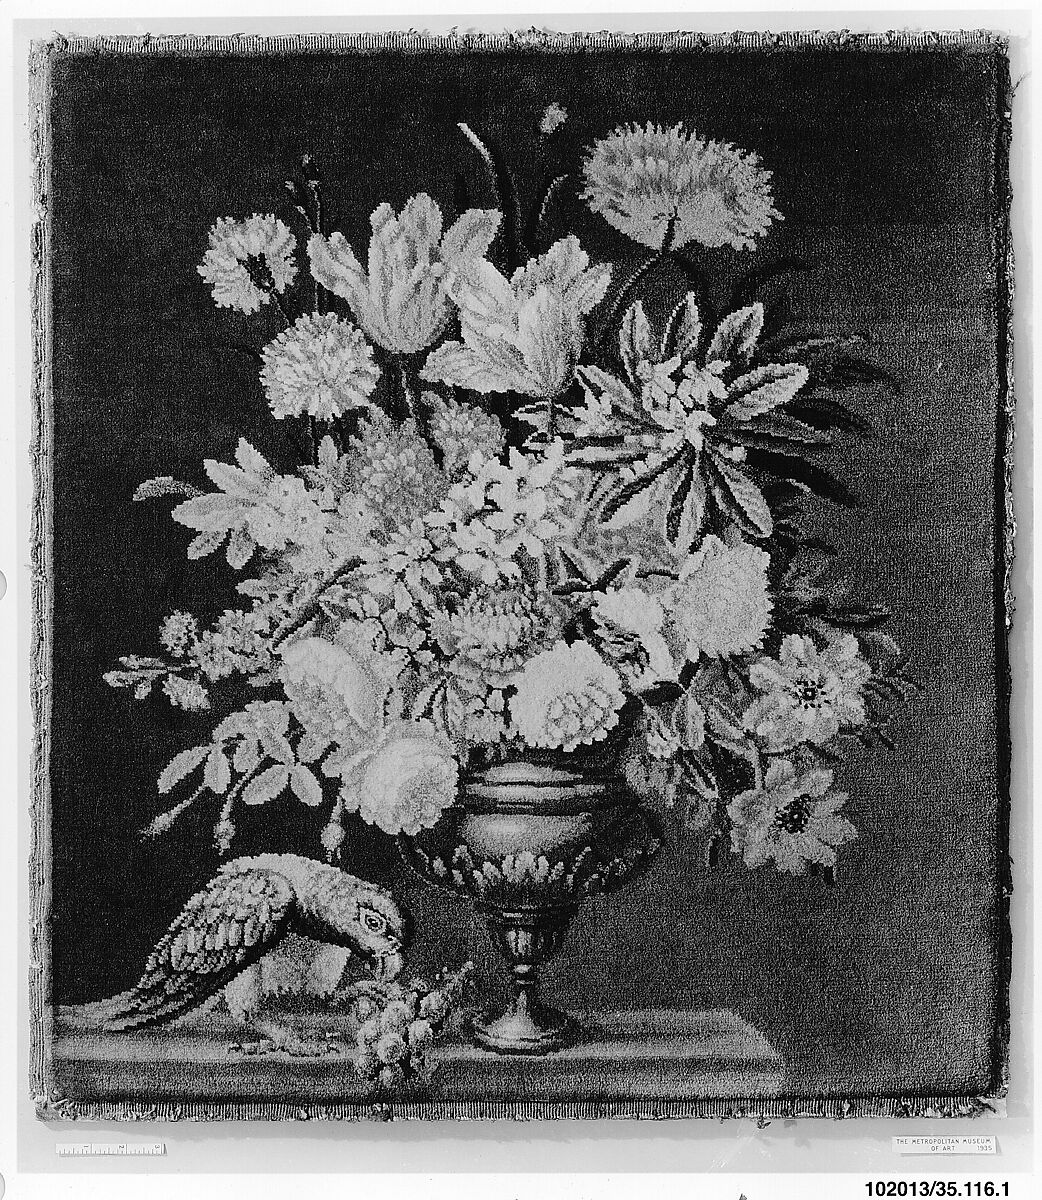 Flowers in a golden vase, with a parrot, Savonnerie Manufactory (Manufactory, established 1626; Manufacture Royale, established 1663), Wool (110-121 knots per sq. inch, 17-19 per sq. cm.), French, Paris 